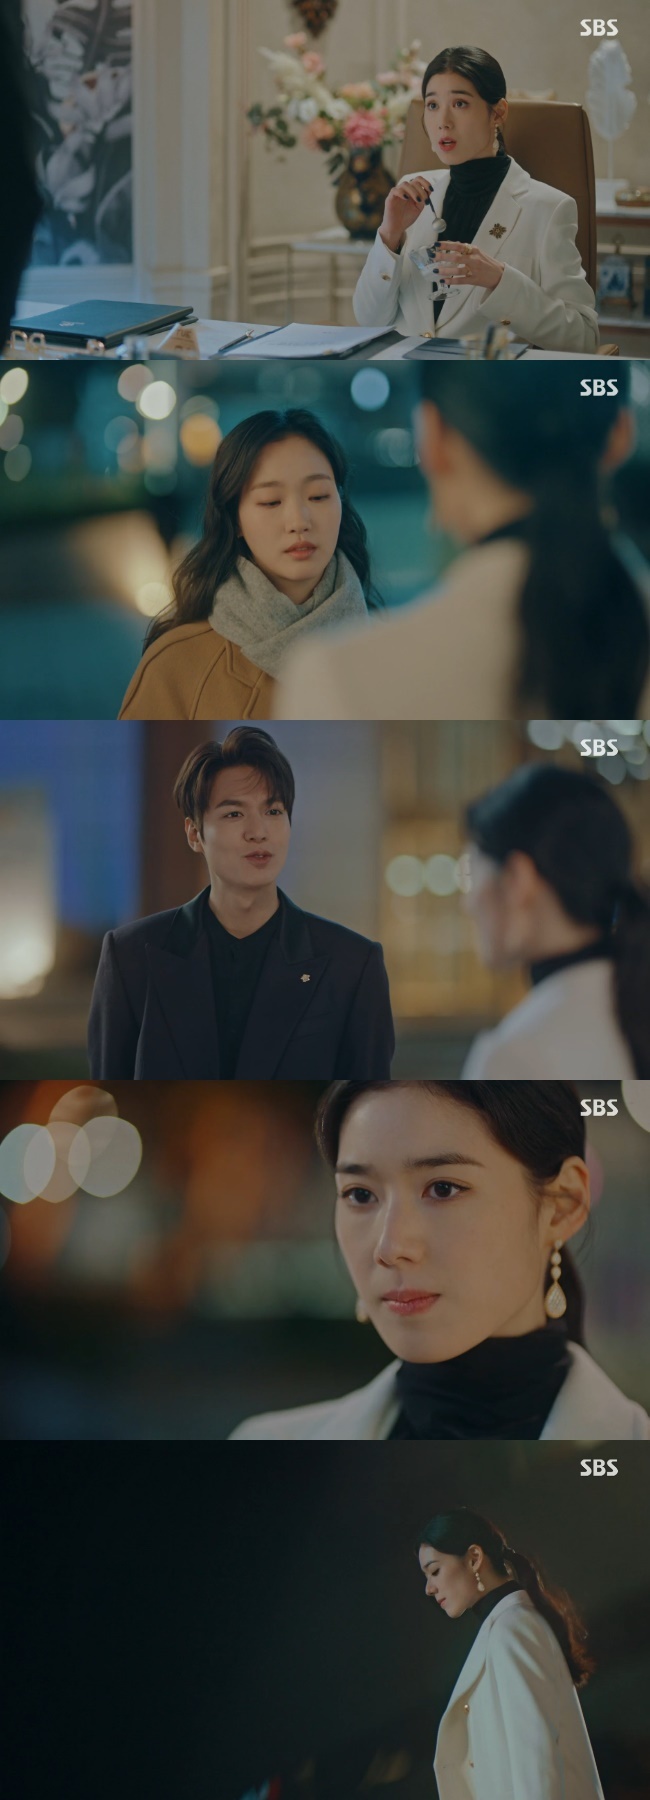 Kim Go-eun hid his identity from Jung Eun-chae.In the 6th episode of SBS gilt Drama The King: The Monarch of Eternity (playplayed by Kim Eun-sook/directed by Baek Sang-hoon and Jung Ji-hyun), which aired on May 2, Jung Tae-eul (played by Kim Go-eun) first met with Koo Seo-ryeong (played by Jung Eun-chae).When he was informed that Lee Gon (Lee Min-ho) was coming to Seoul, he went to see him in an uneasy mood. When he heard that he had arrived, he said, I should not be caught.Ill not show it strangely.Im in a lot of trouble, Lee said to Gu, and its a very private place. Of course, Im going to report it, but I didnt have any consideration.So, the old Seo-ryong replied, Where is the construction on the day of the country? The king is my country.When asked about his name, he said, I am a fan of the prime minister. When asked about his name, Jung Tae-eun said, I am a The Passenger.Im leaving soon. Its the first time the Korean Empire has ever been, so everything is like a fairy tale.Lee Ha-na